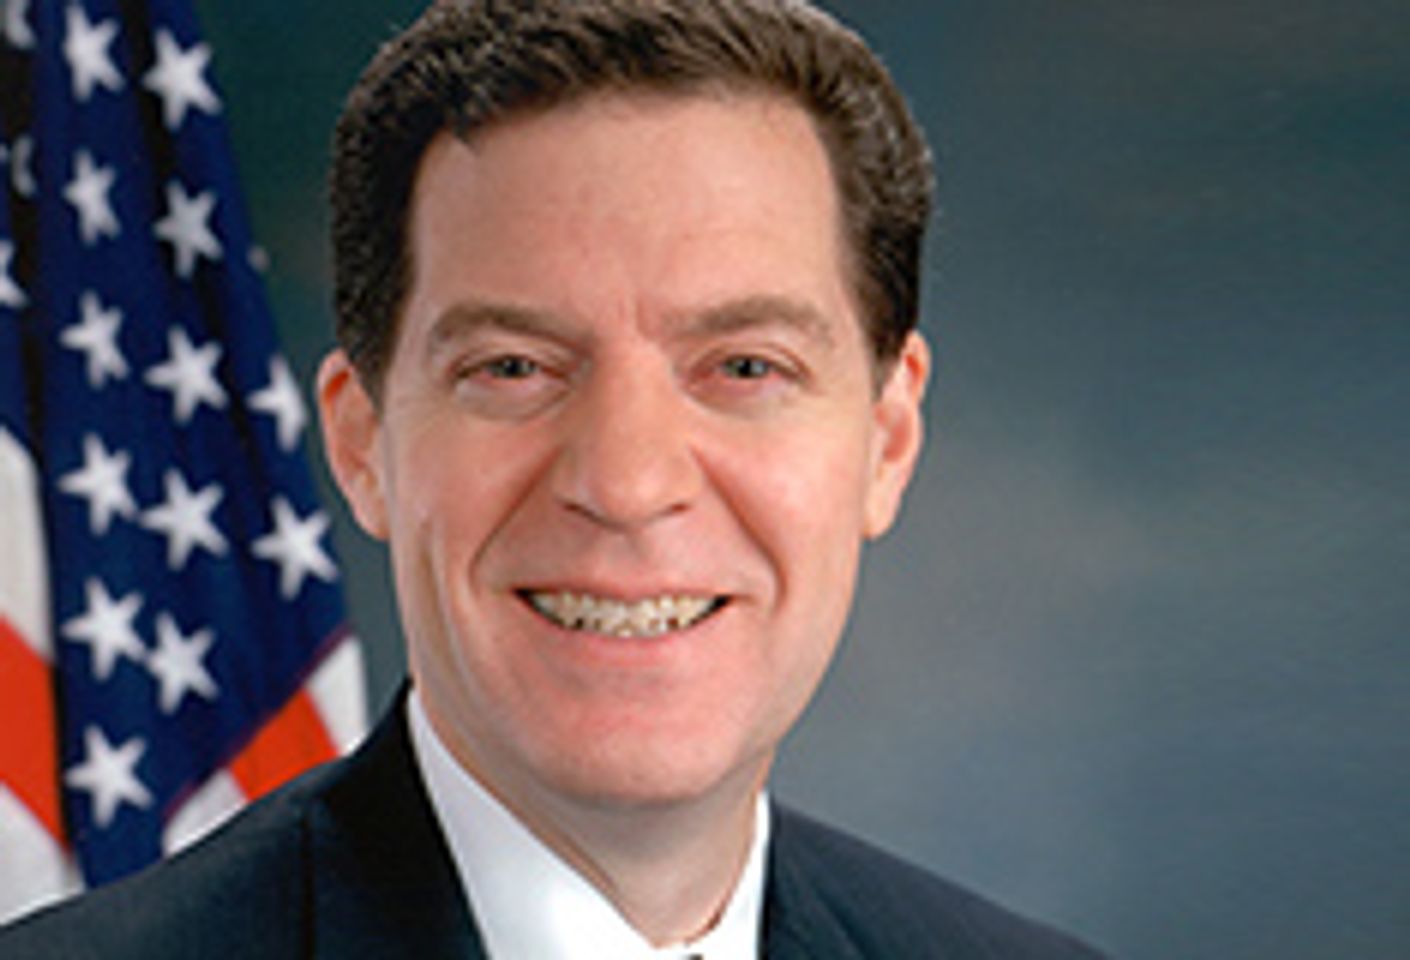 Sen. Brownback to Drop Out of Presidential Race